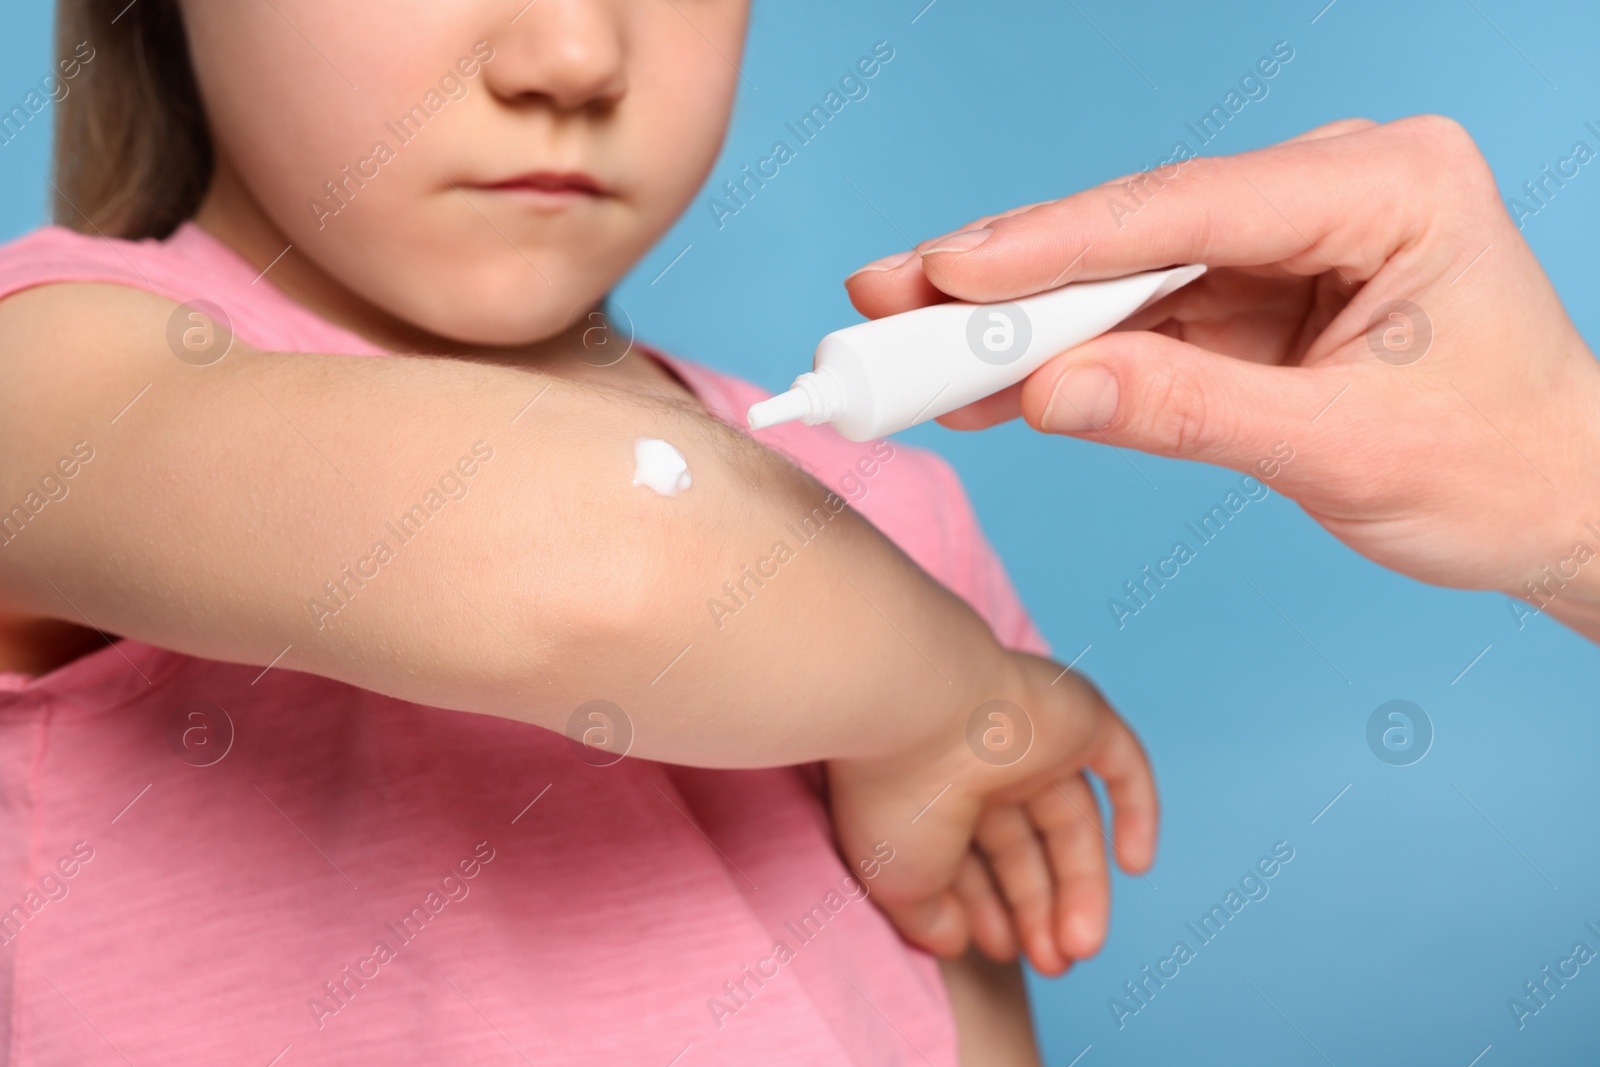 Photo of Mother applying ointment onto her daughter's elbow on light blue background, closeup